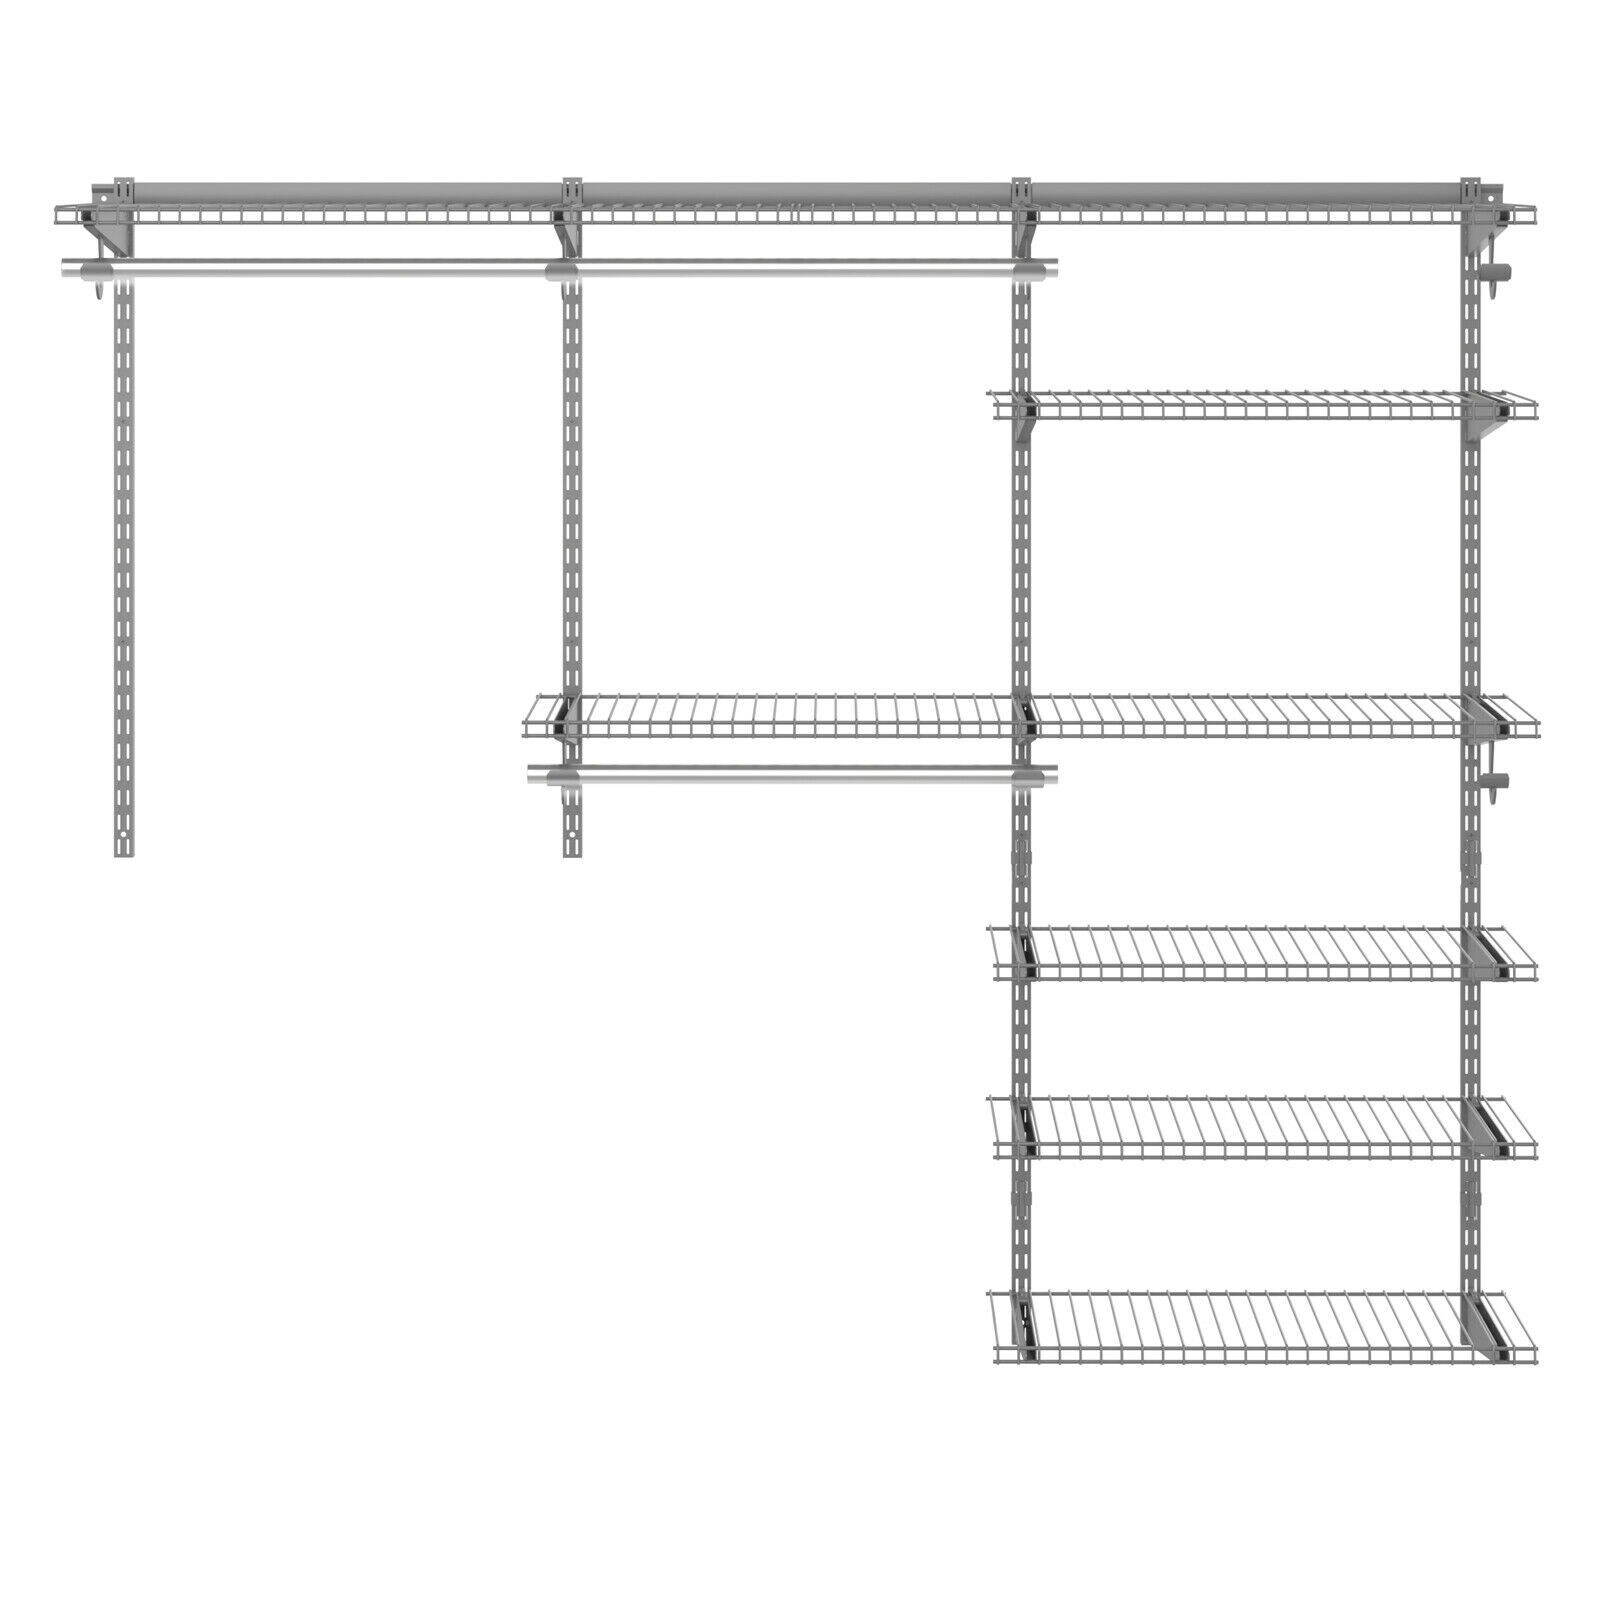 https://ak1.ostkcdn.com/images/products/is/images/direct/f4f0ba996faa89db92da473964b329d19bd43421/Custom-Closet-Organizer-Kit-4-to-6-ft-Wall-Mounted-Closet-System-with-Hang-Rod-Gray.jpg